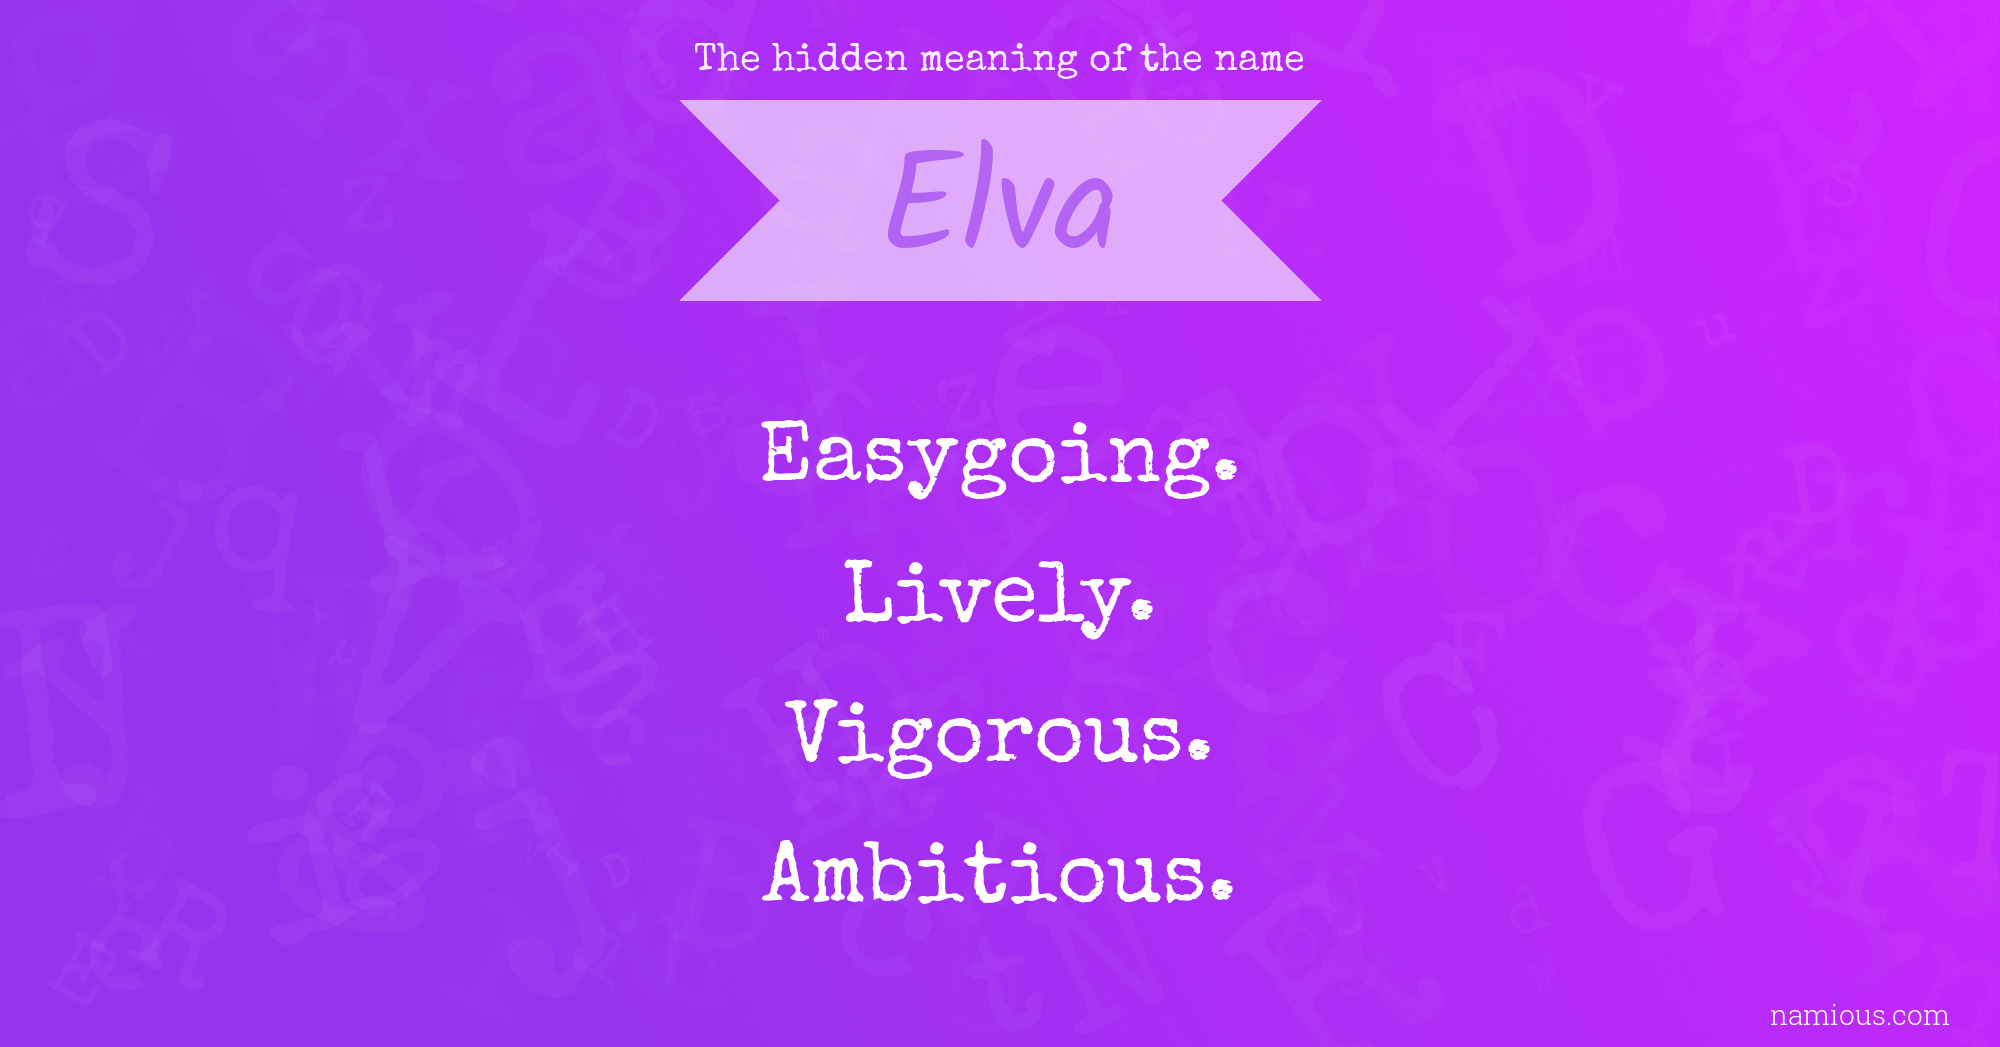 The hidden meaning of the name Elva